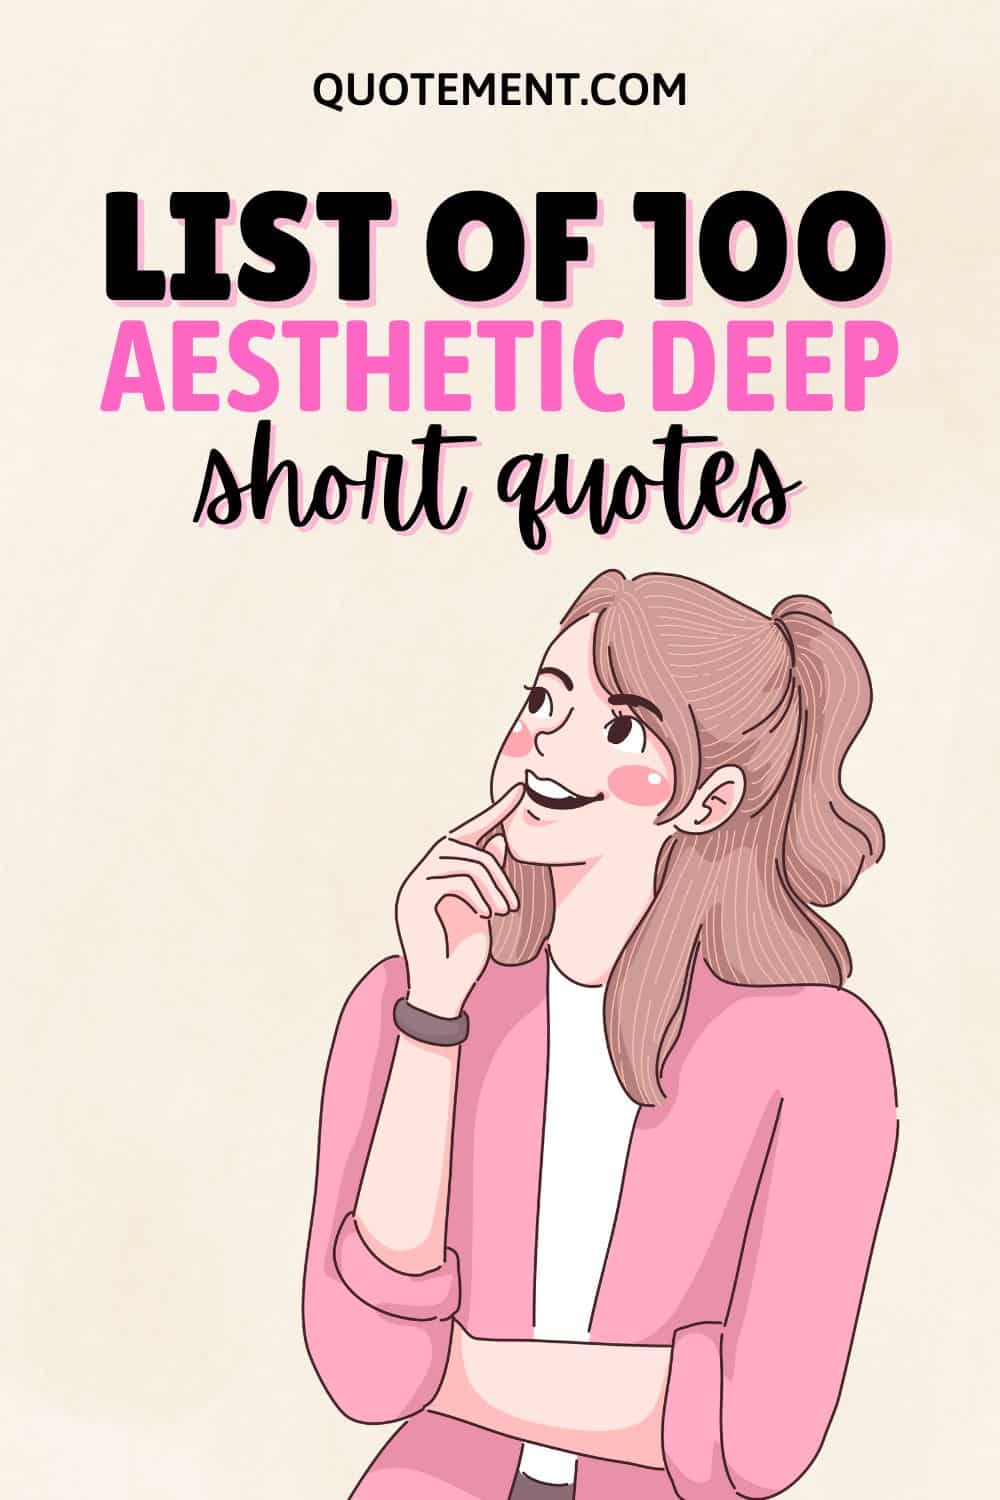 100 Aesthetic Deep Short Quotes To Get You Motivated
